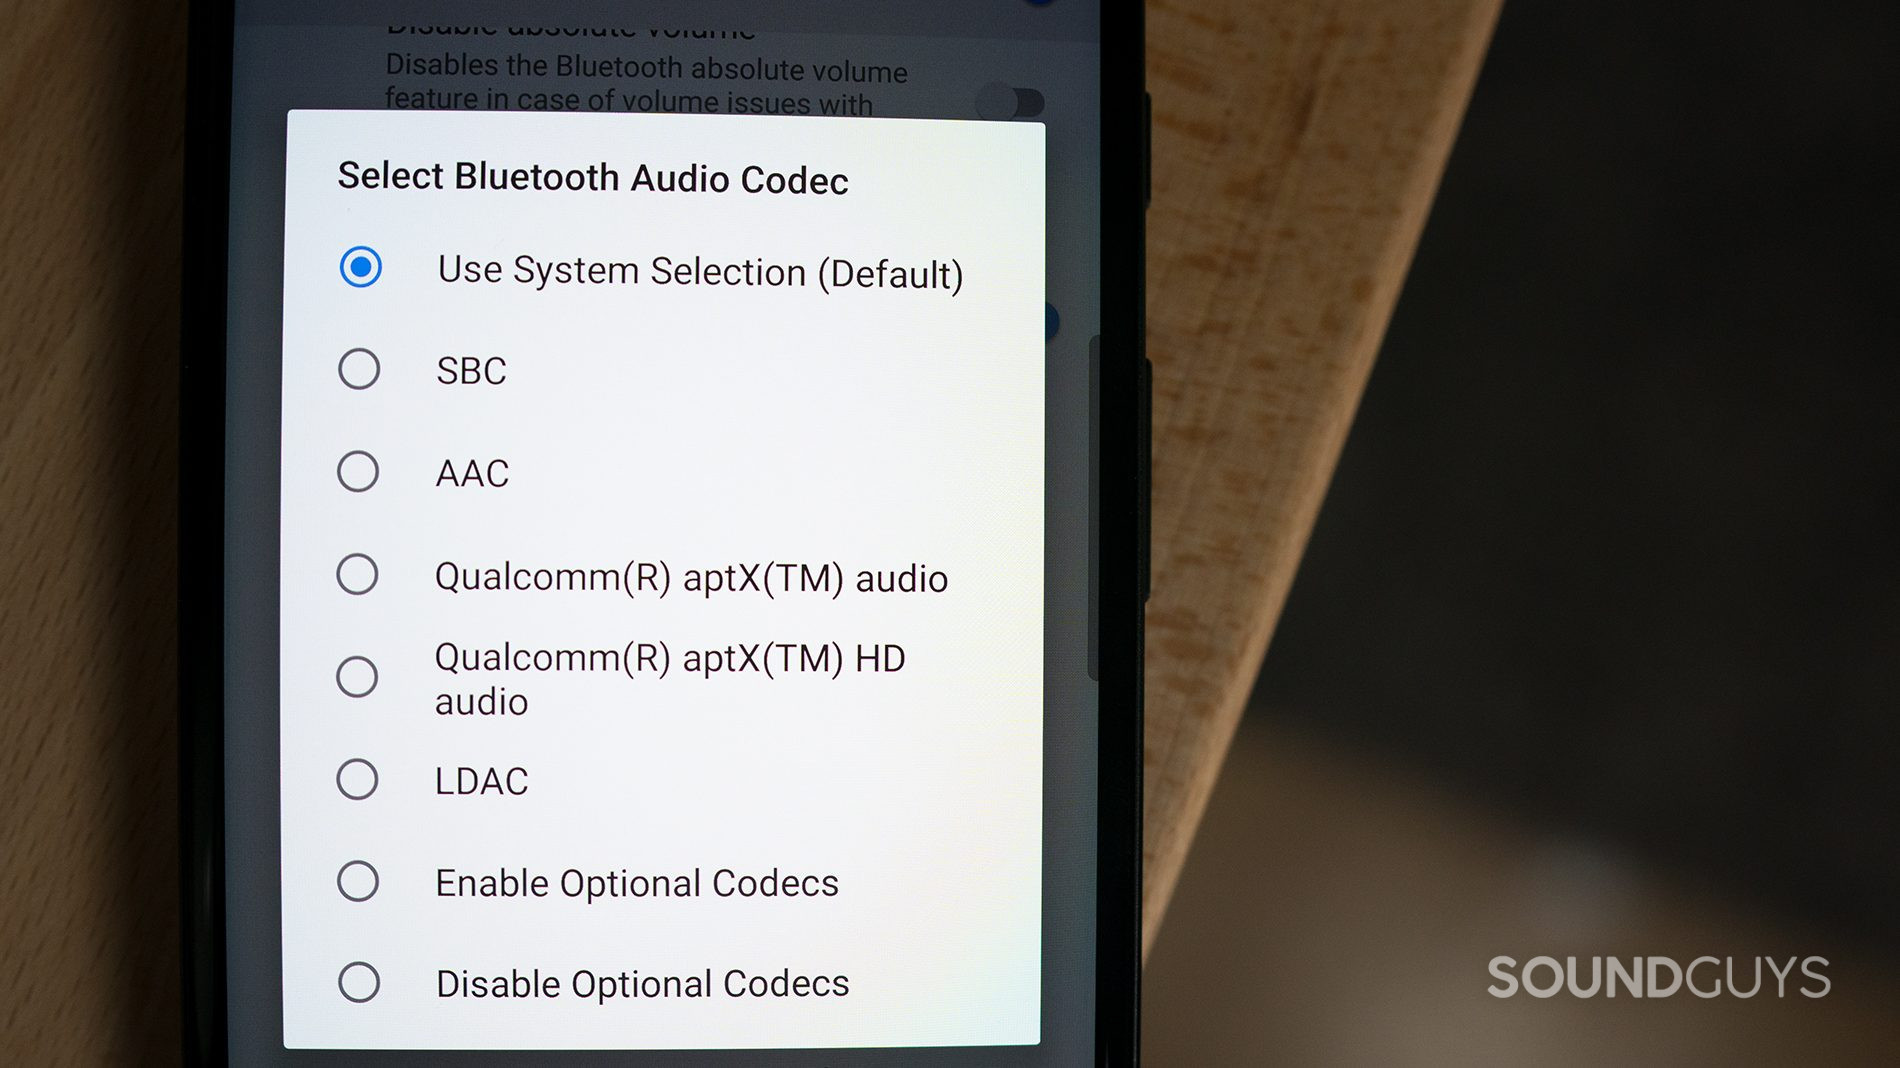 The Bluetooth codec options in Android.